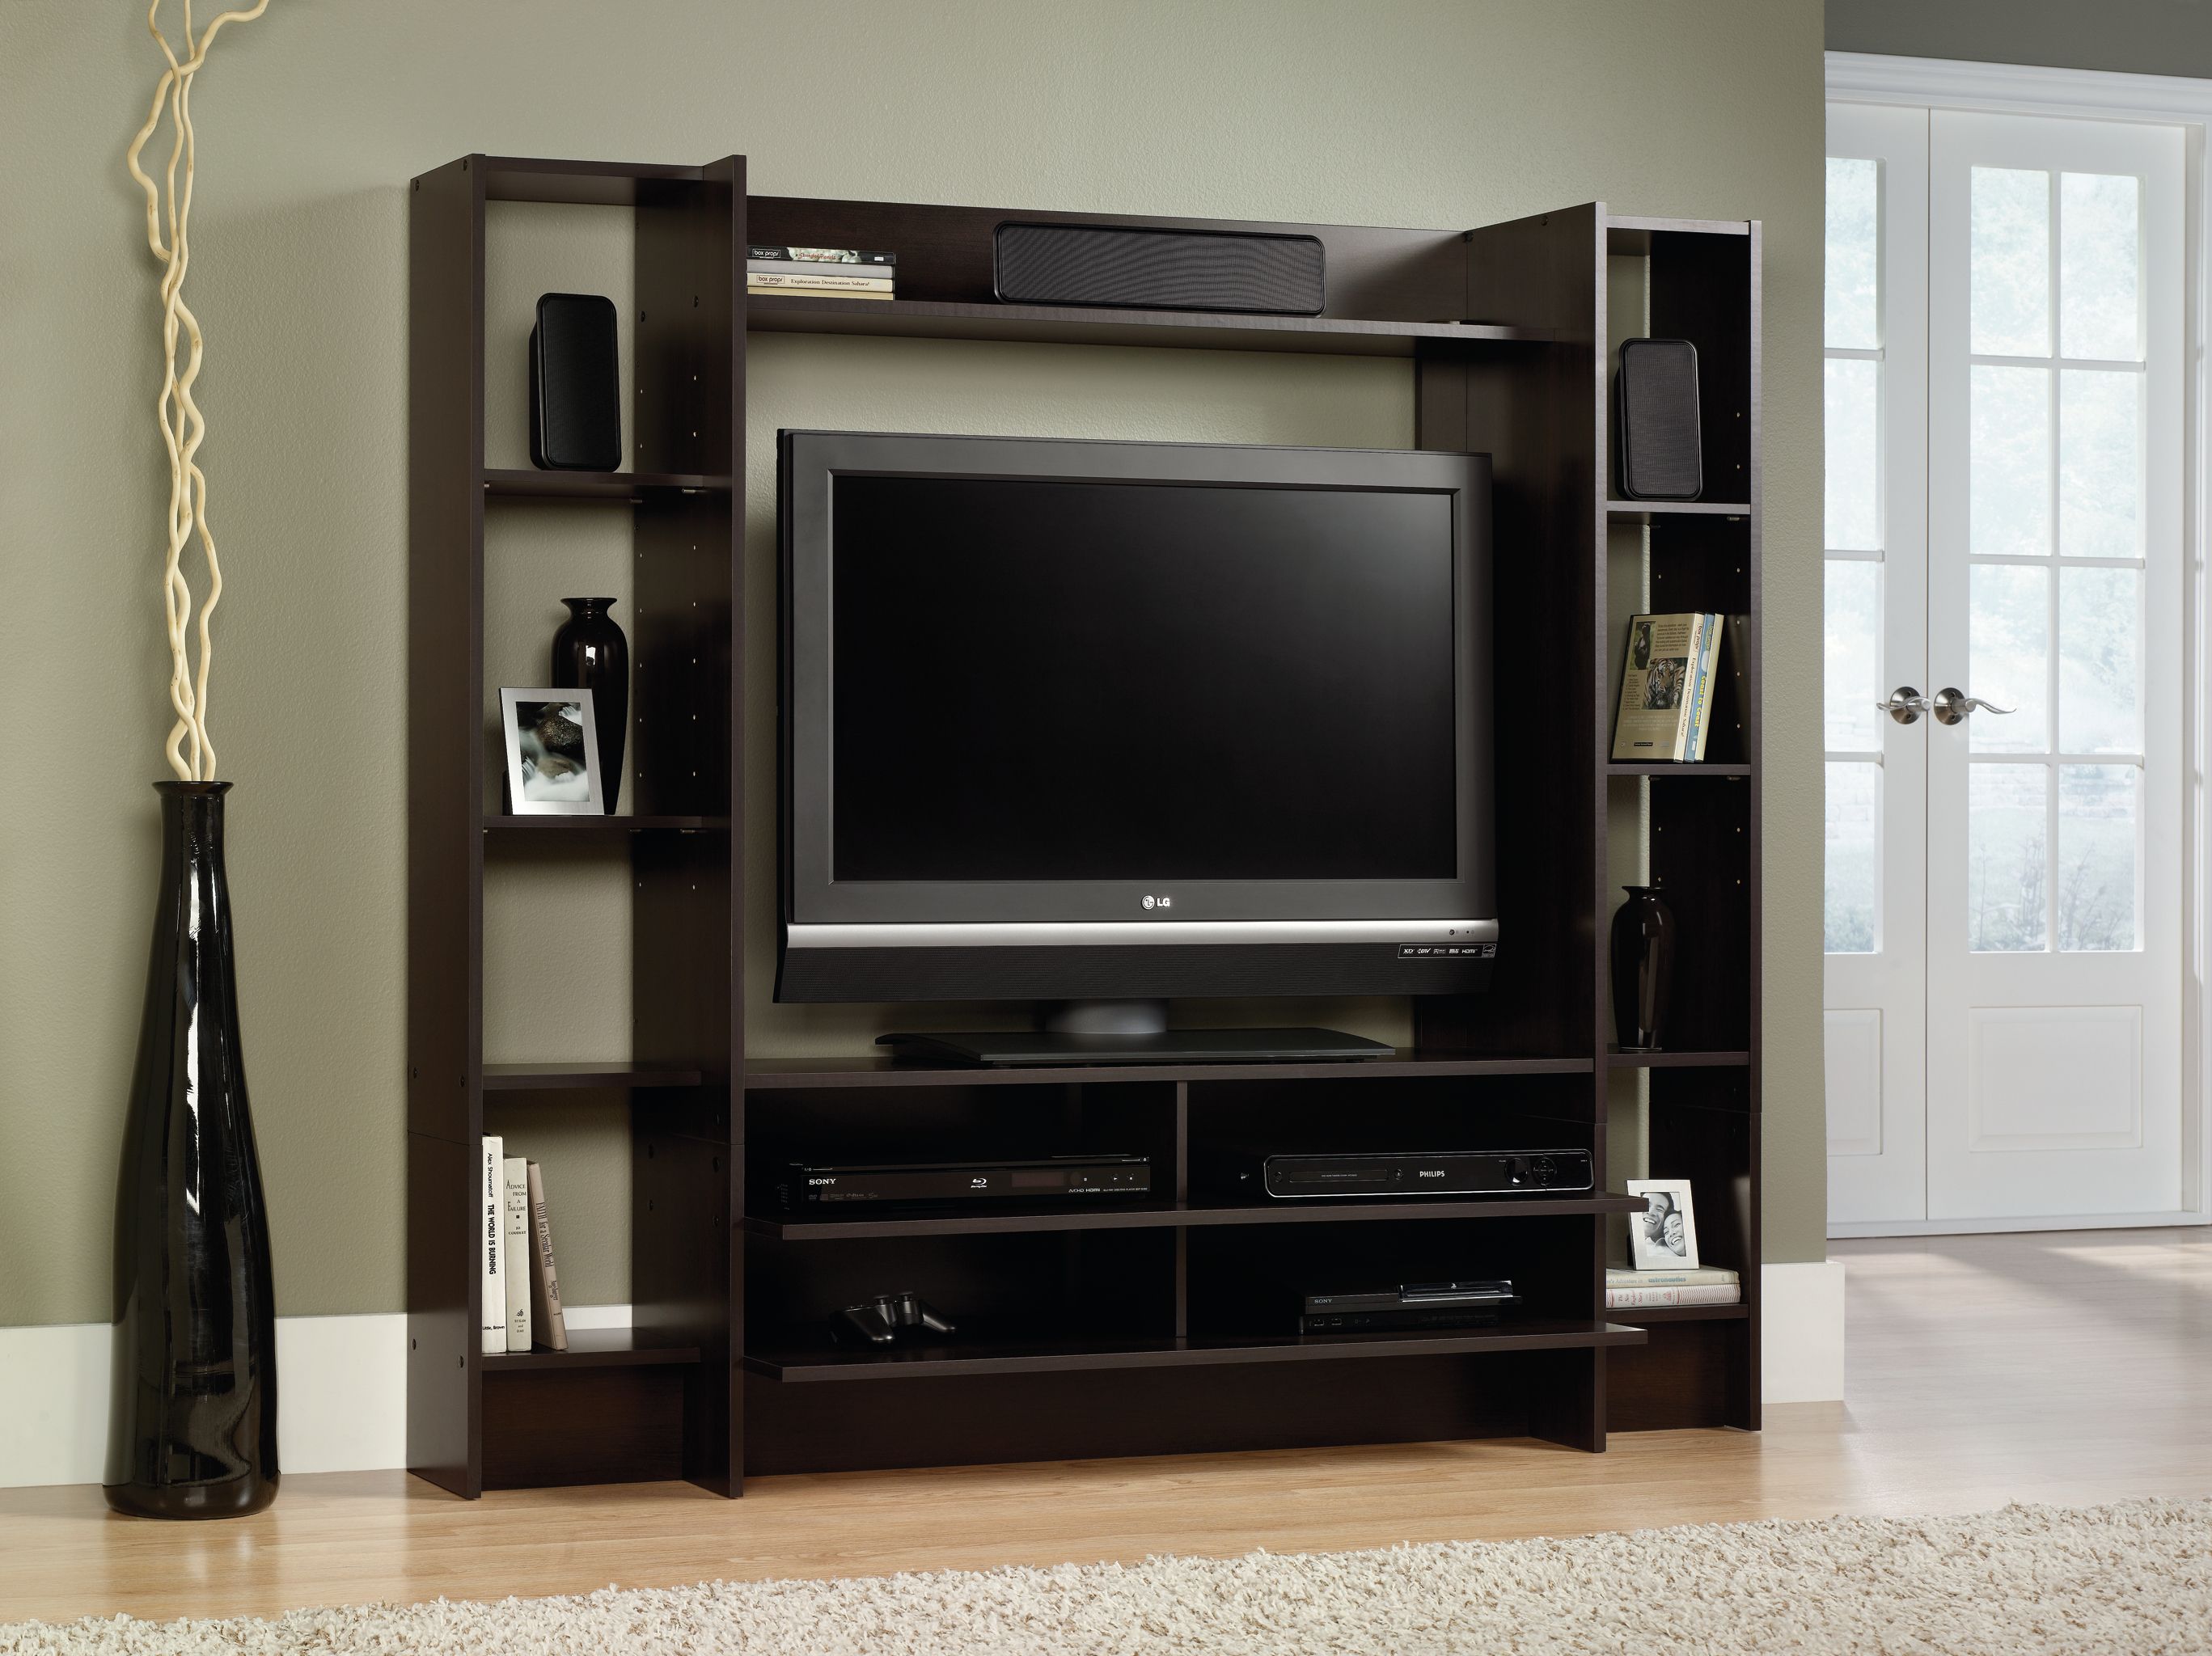 Sauder Beginnings Entertainment Wall System for TVs up to 42", Cinnamon Cherry Finish - image 1 of 4